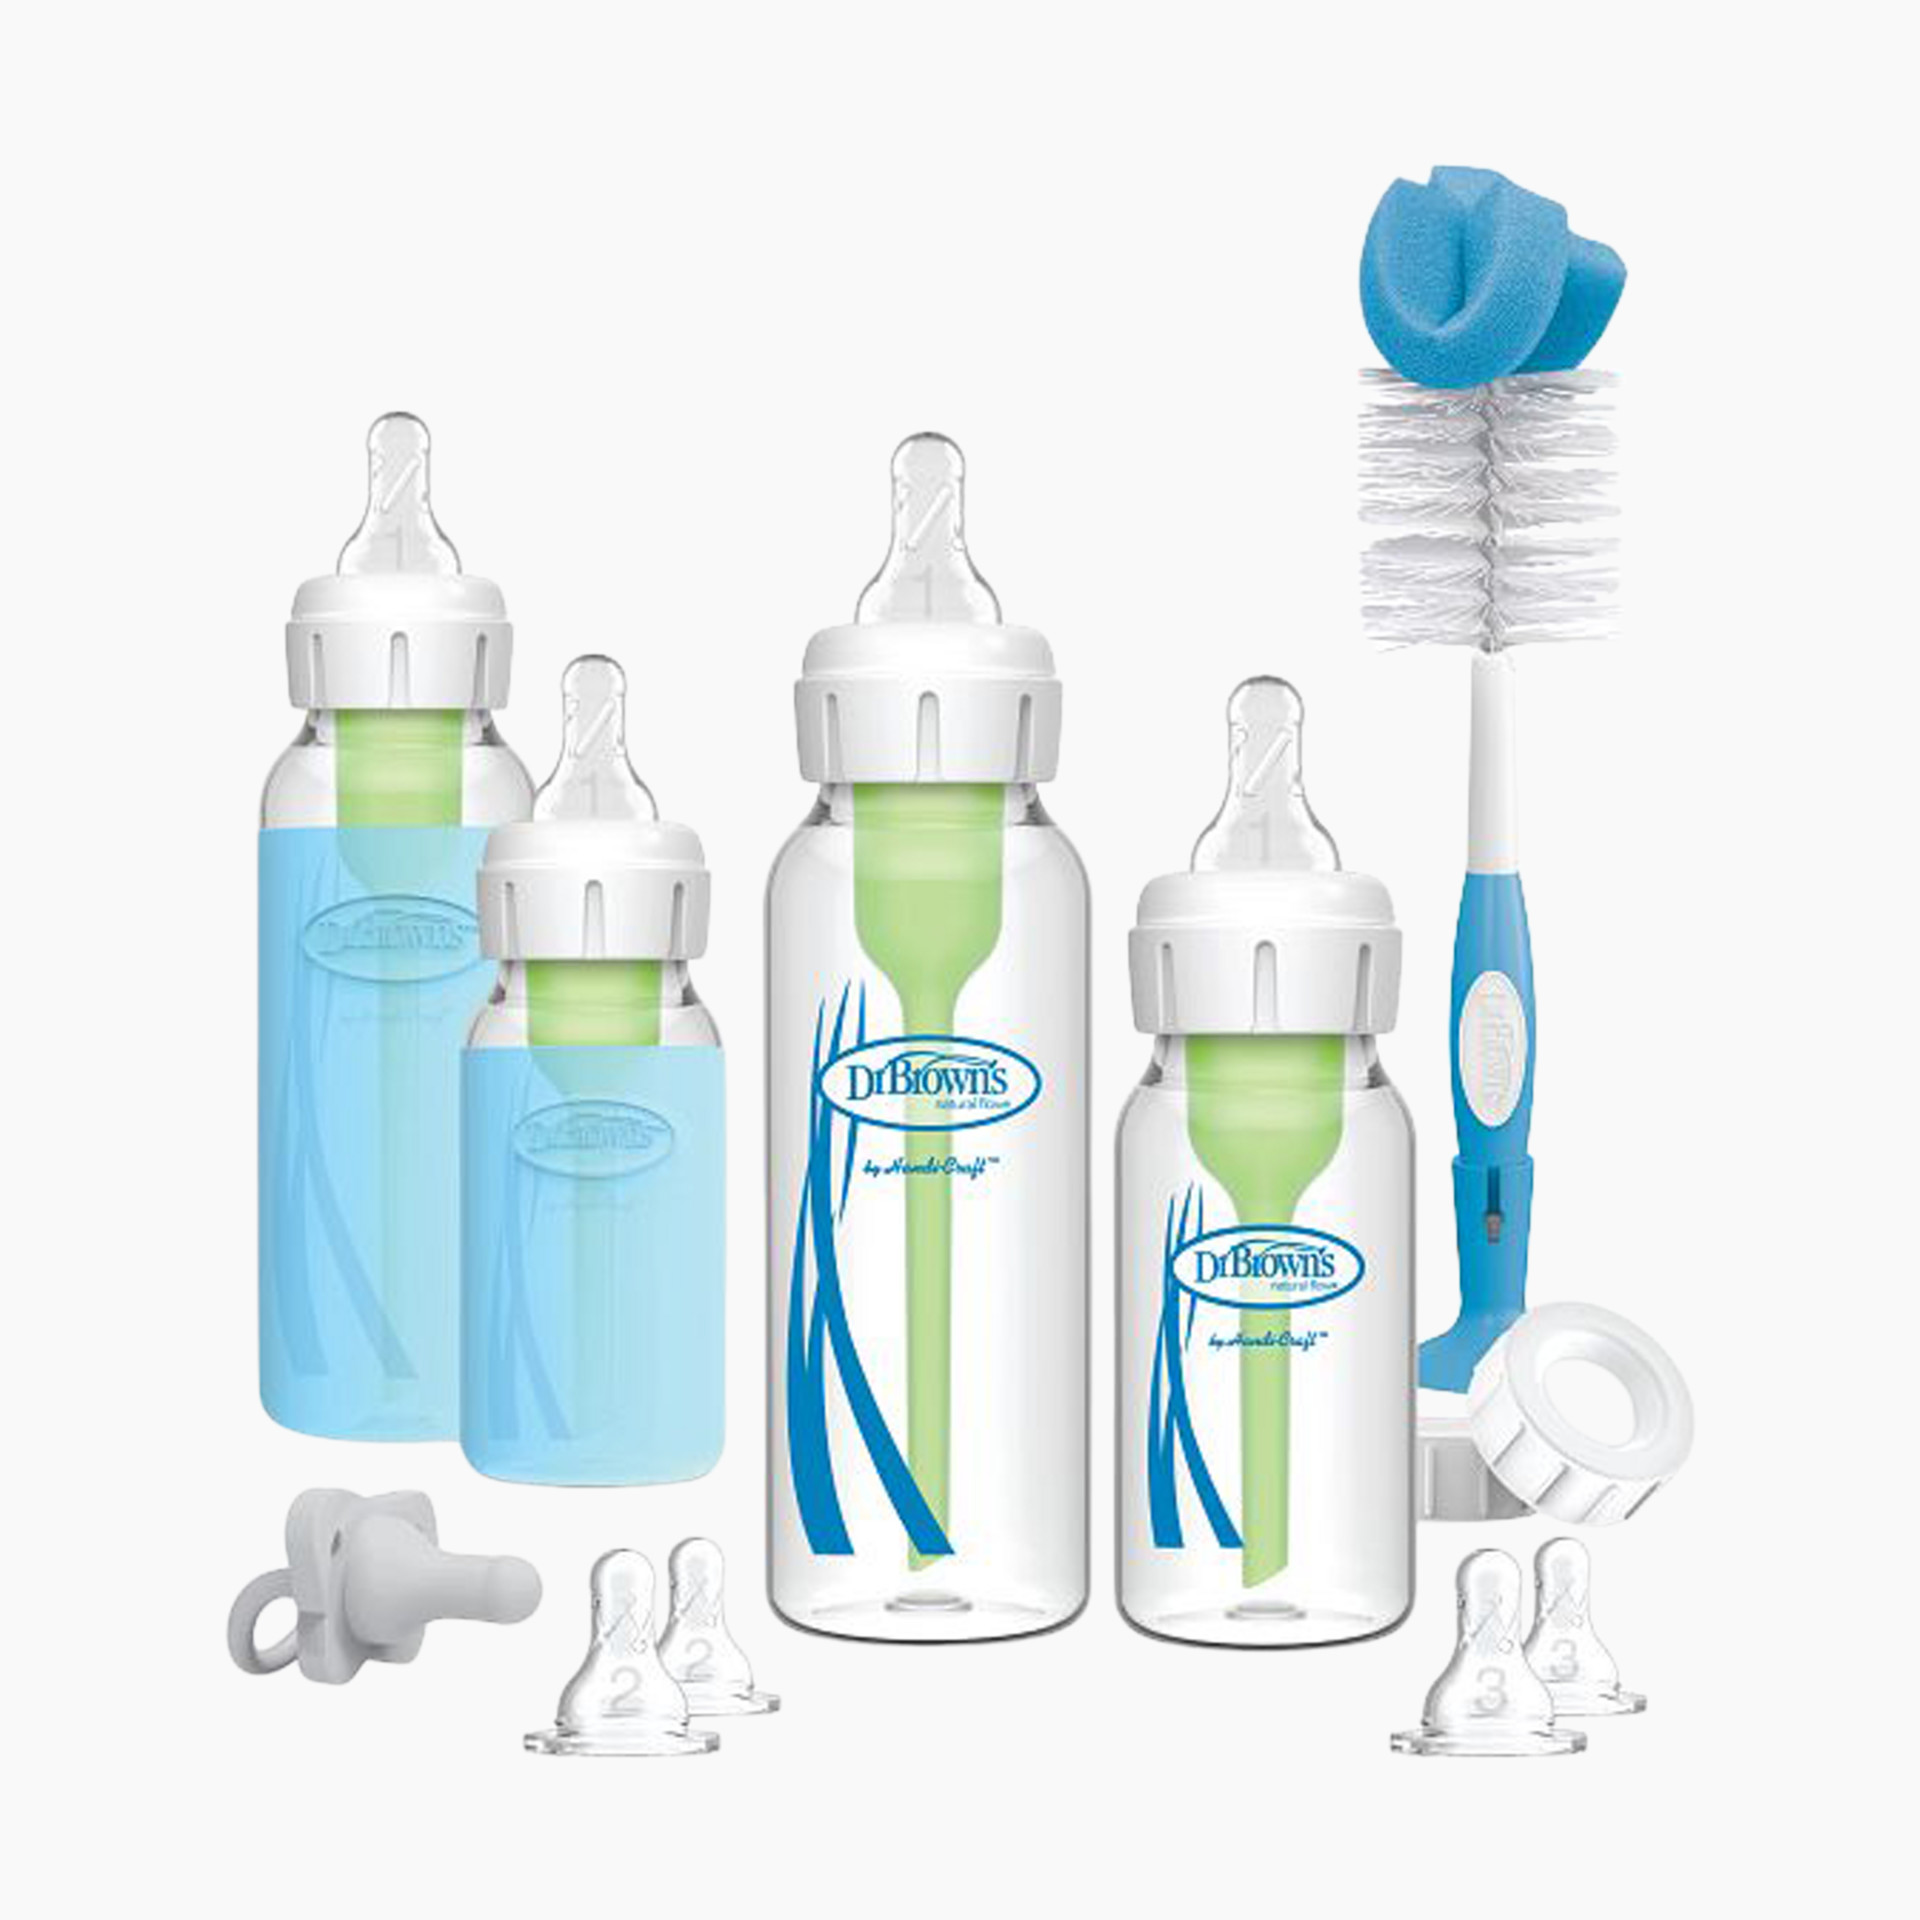 Dr. Brown's Natural Flow Anti-Colic Options+ Narrow Baby Bottle Gift Set  with Advantage Pacifier, and Bottle Travel Caps